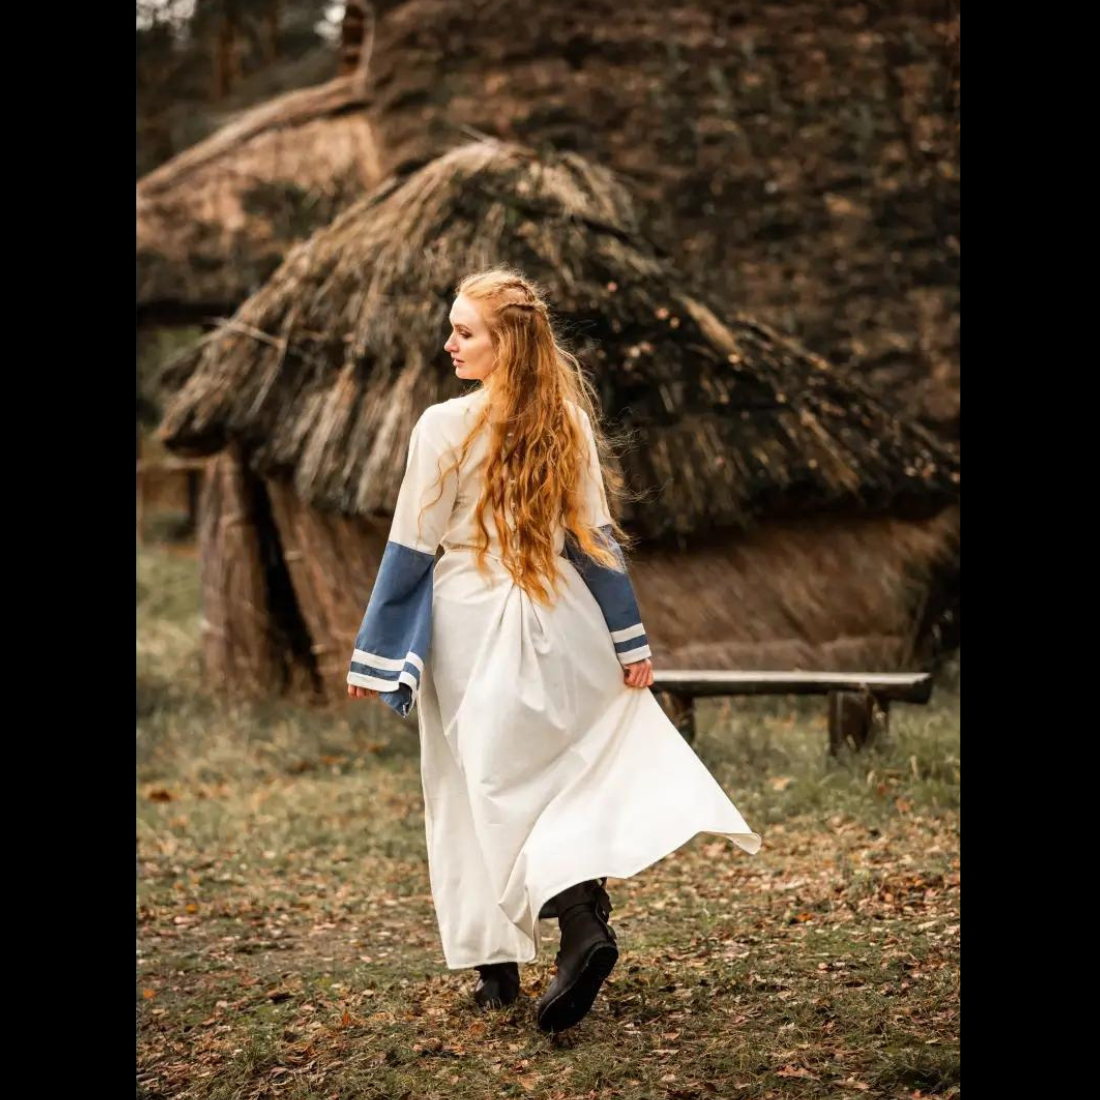 Viking Dress - Long Sleeves in Natural and Blue with Lacing